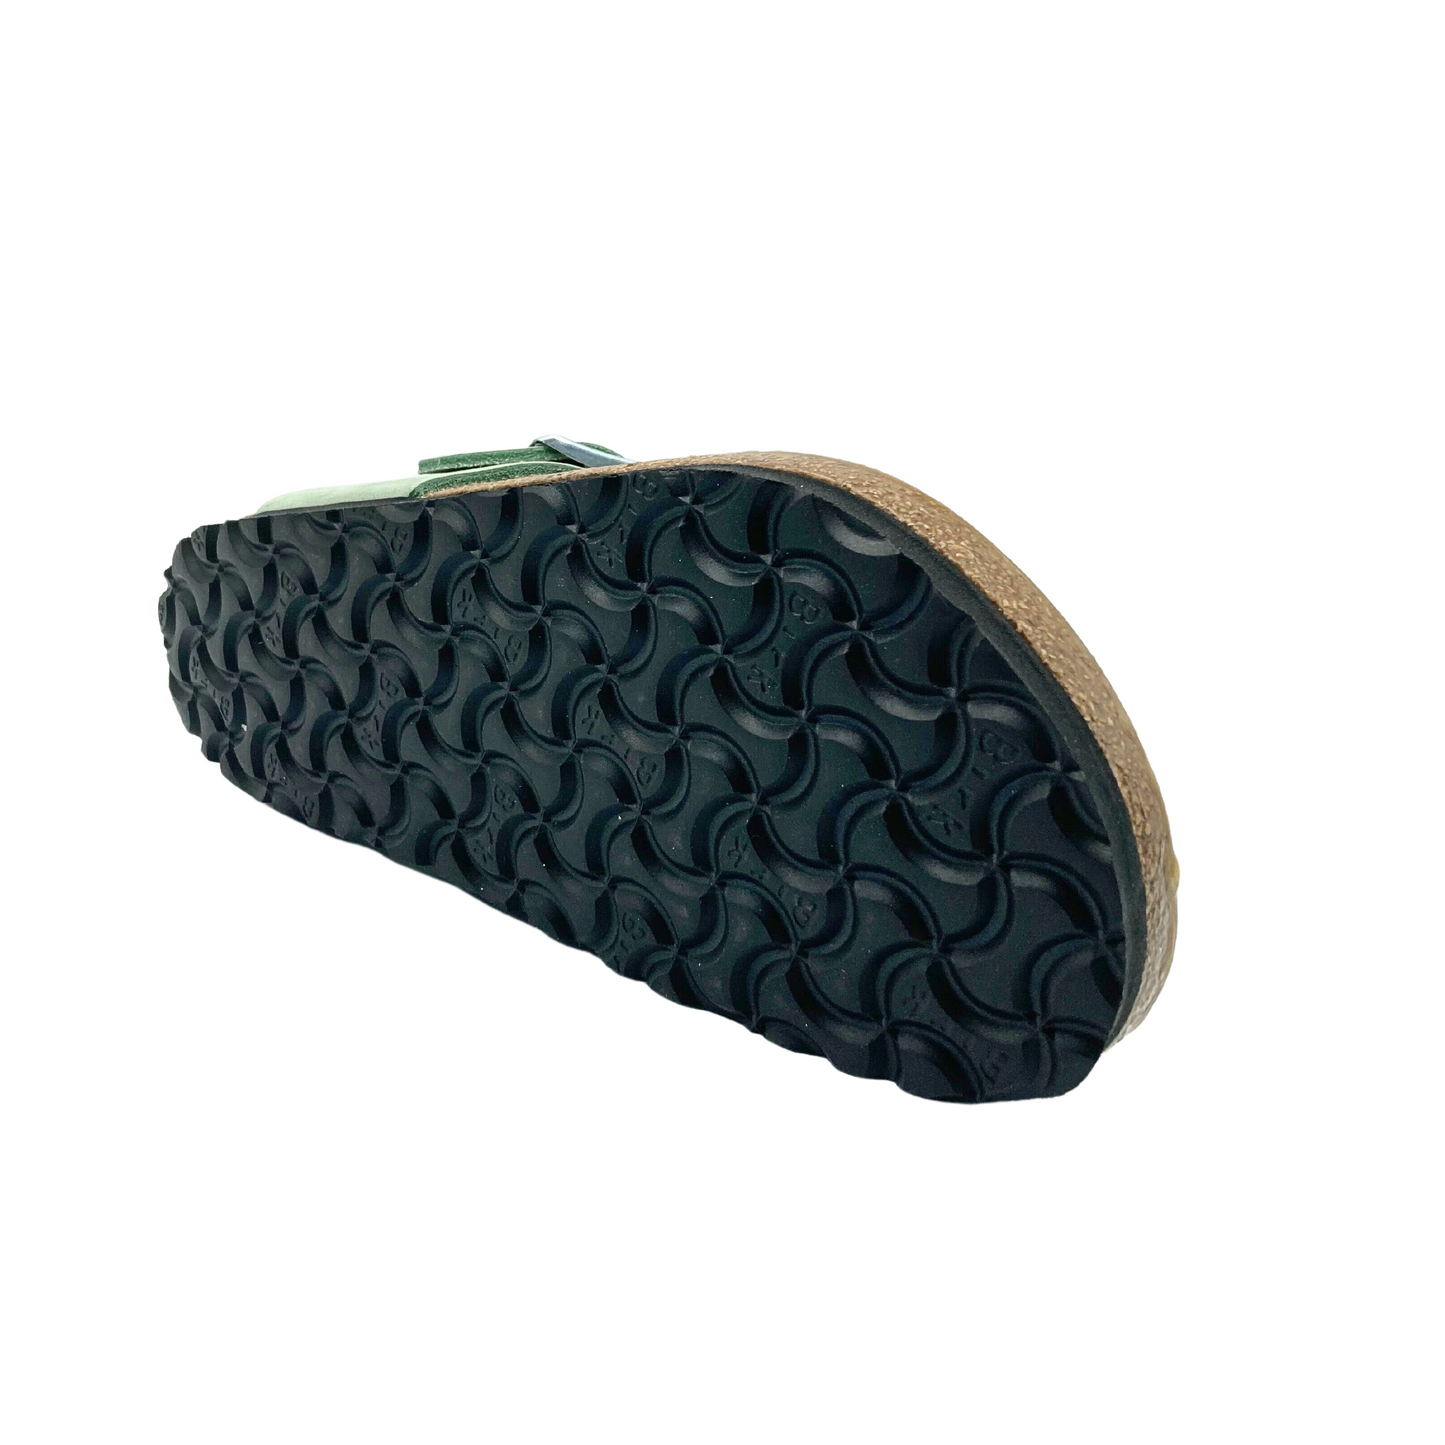 Sole of right shoe.  Thick, rugged sole to walk on any surface